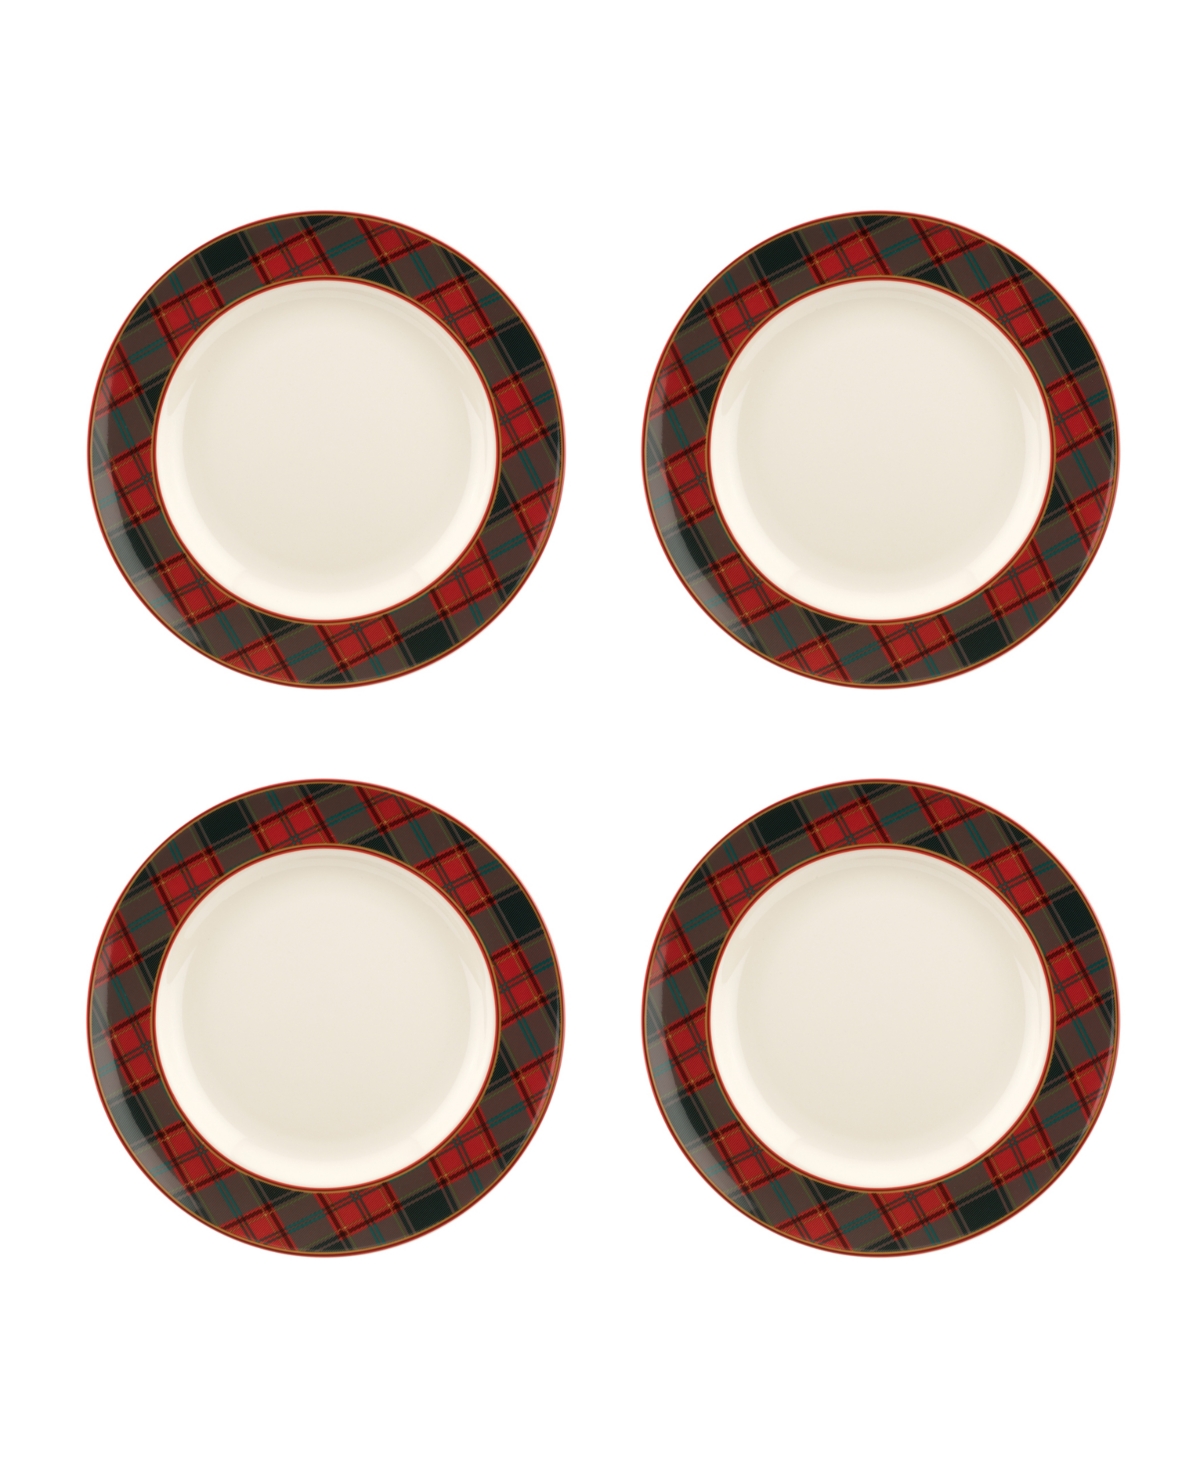 Christmas Tree Tartan Dinner Plate, Set of 4 - White Body With Multi Color Patterned De